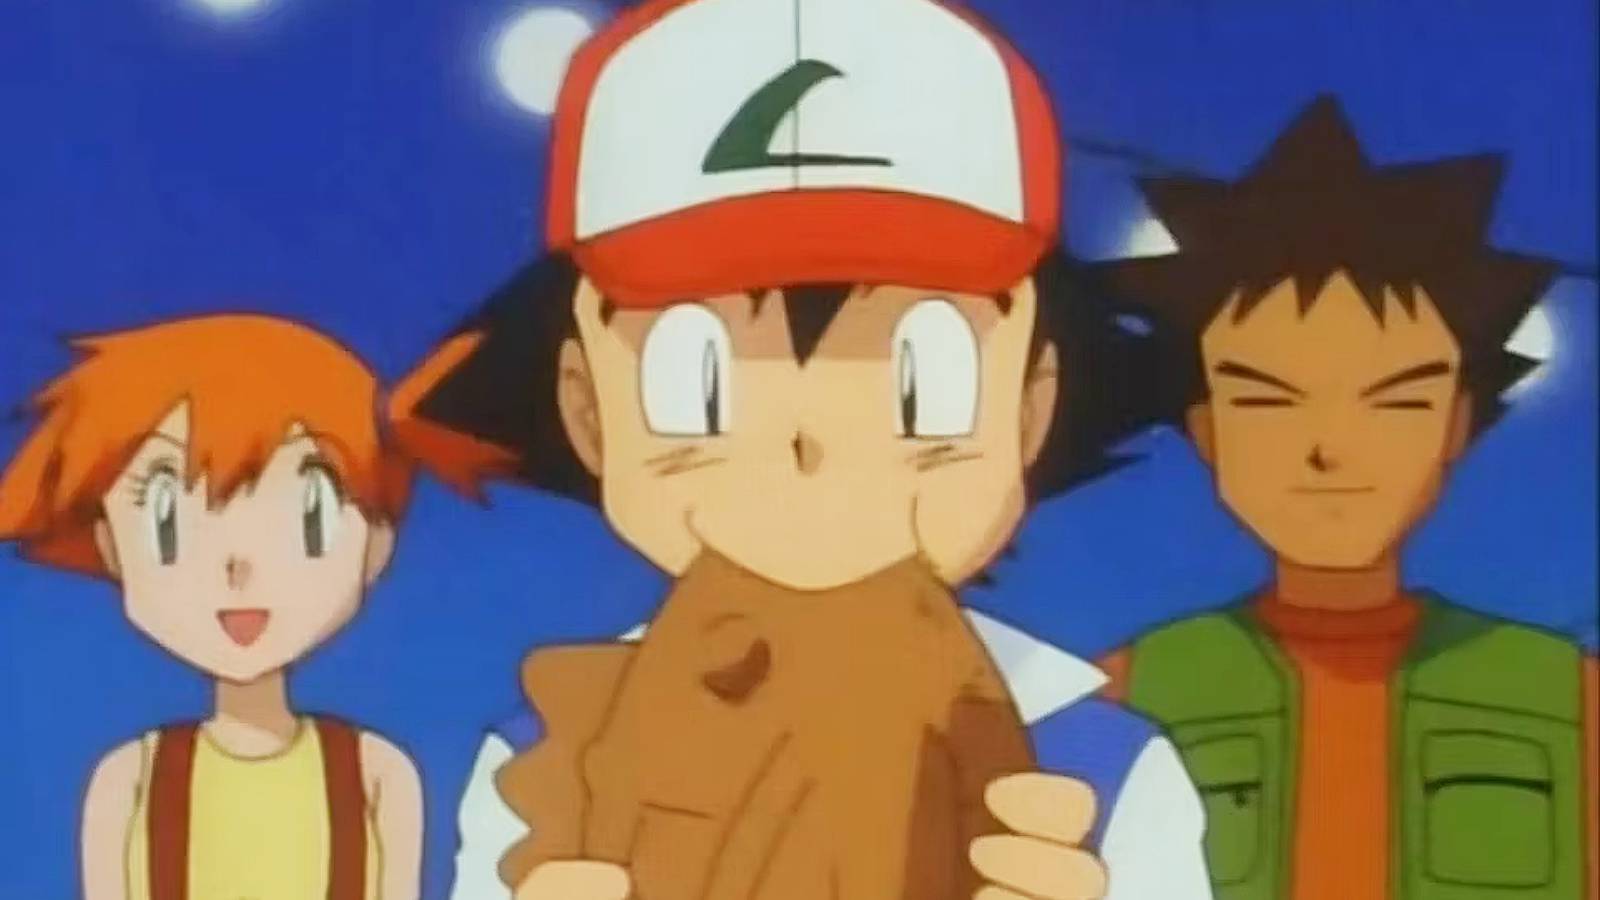 A still from the Pokemon anime shows Ash Ketchum eating a fried Magikarp